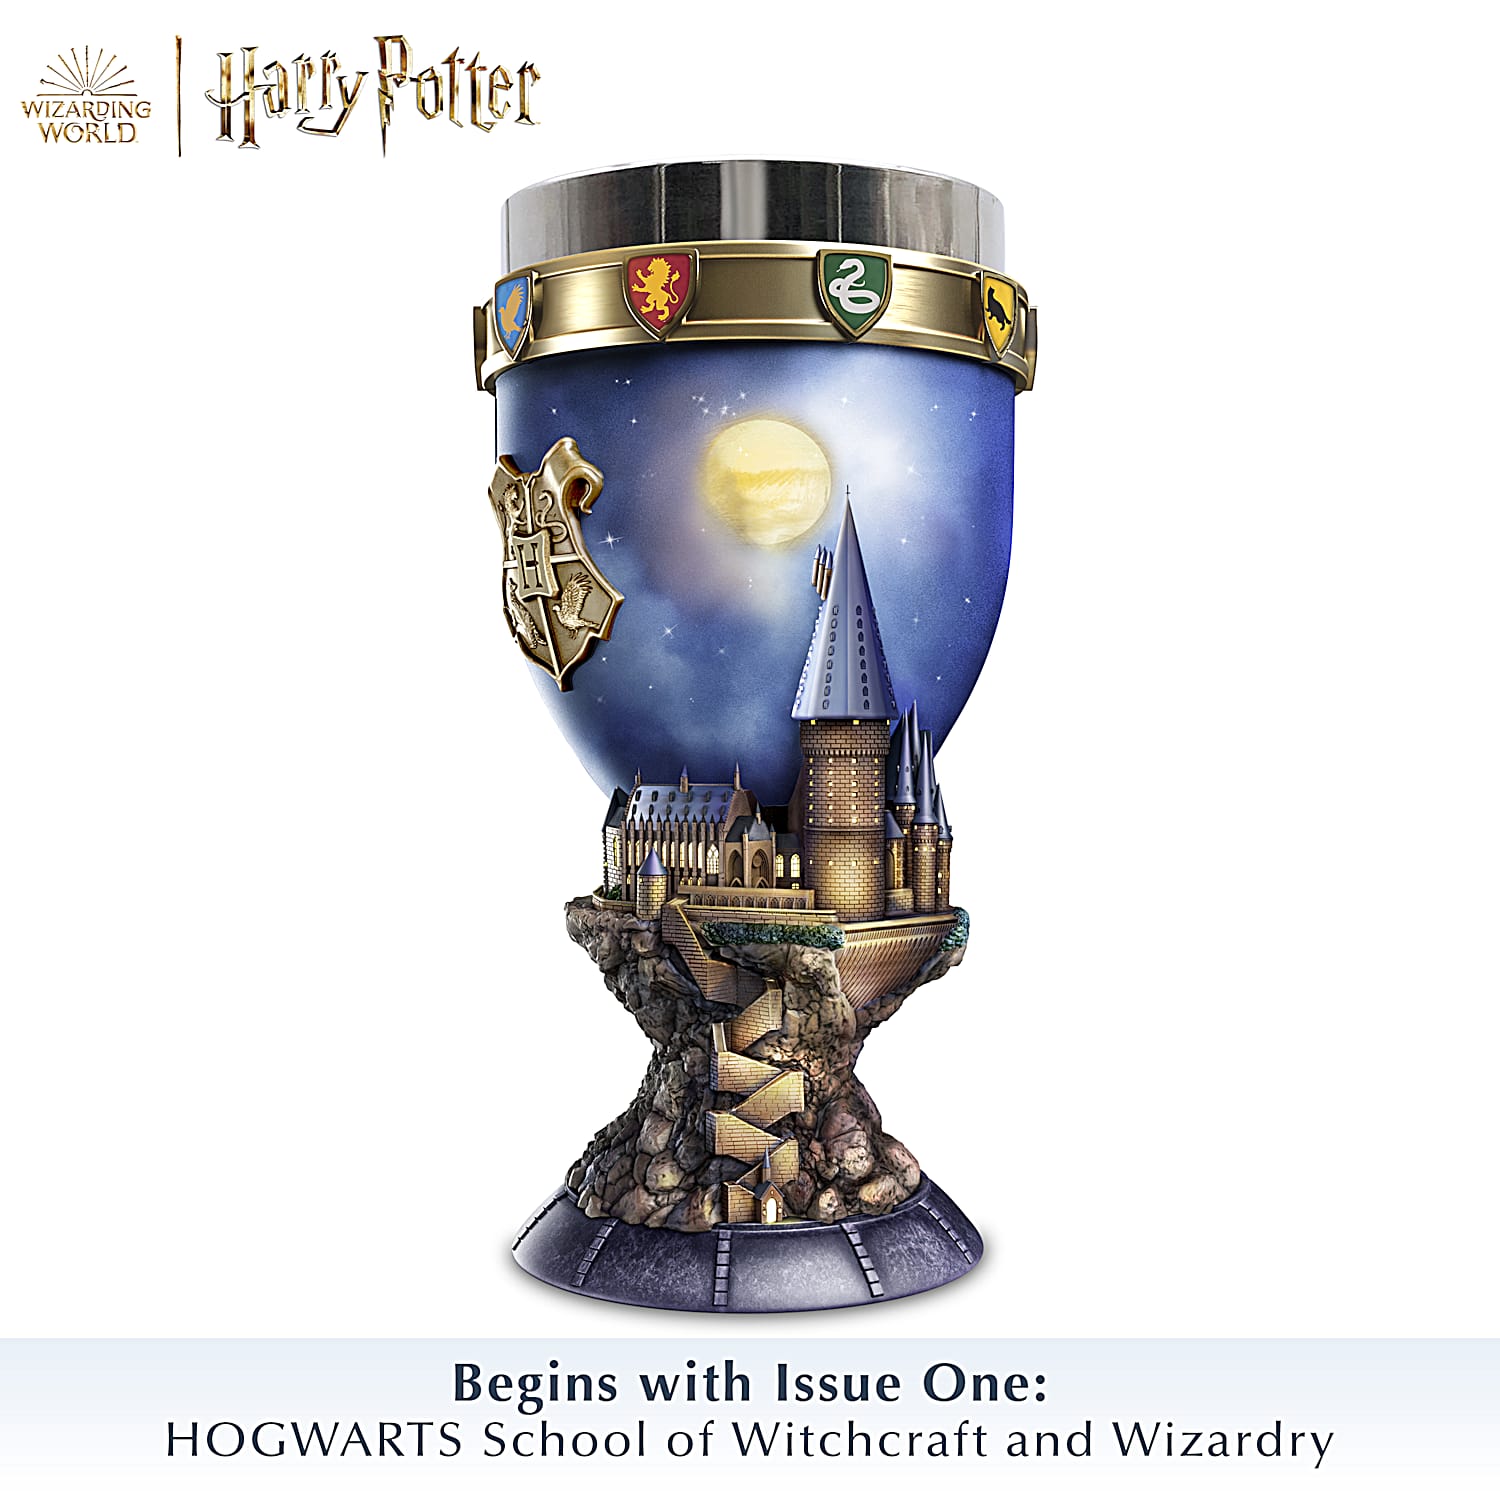 HARRY POTTER HOGWARTS Drink-Safe Stainless Steel 8.8 Oz Goblet Collection  Featuring School Seals & Emblems Of The Houses That Appear On The Cup Sides